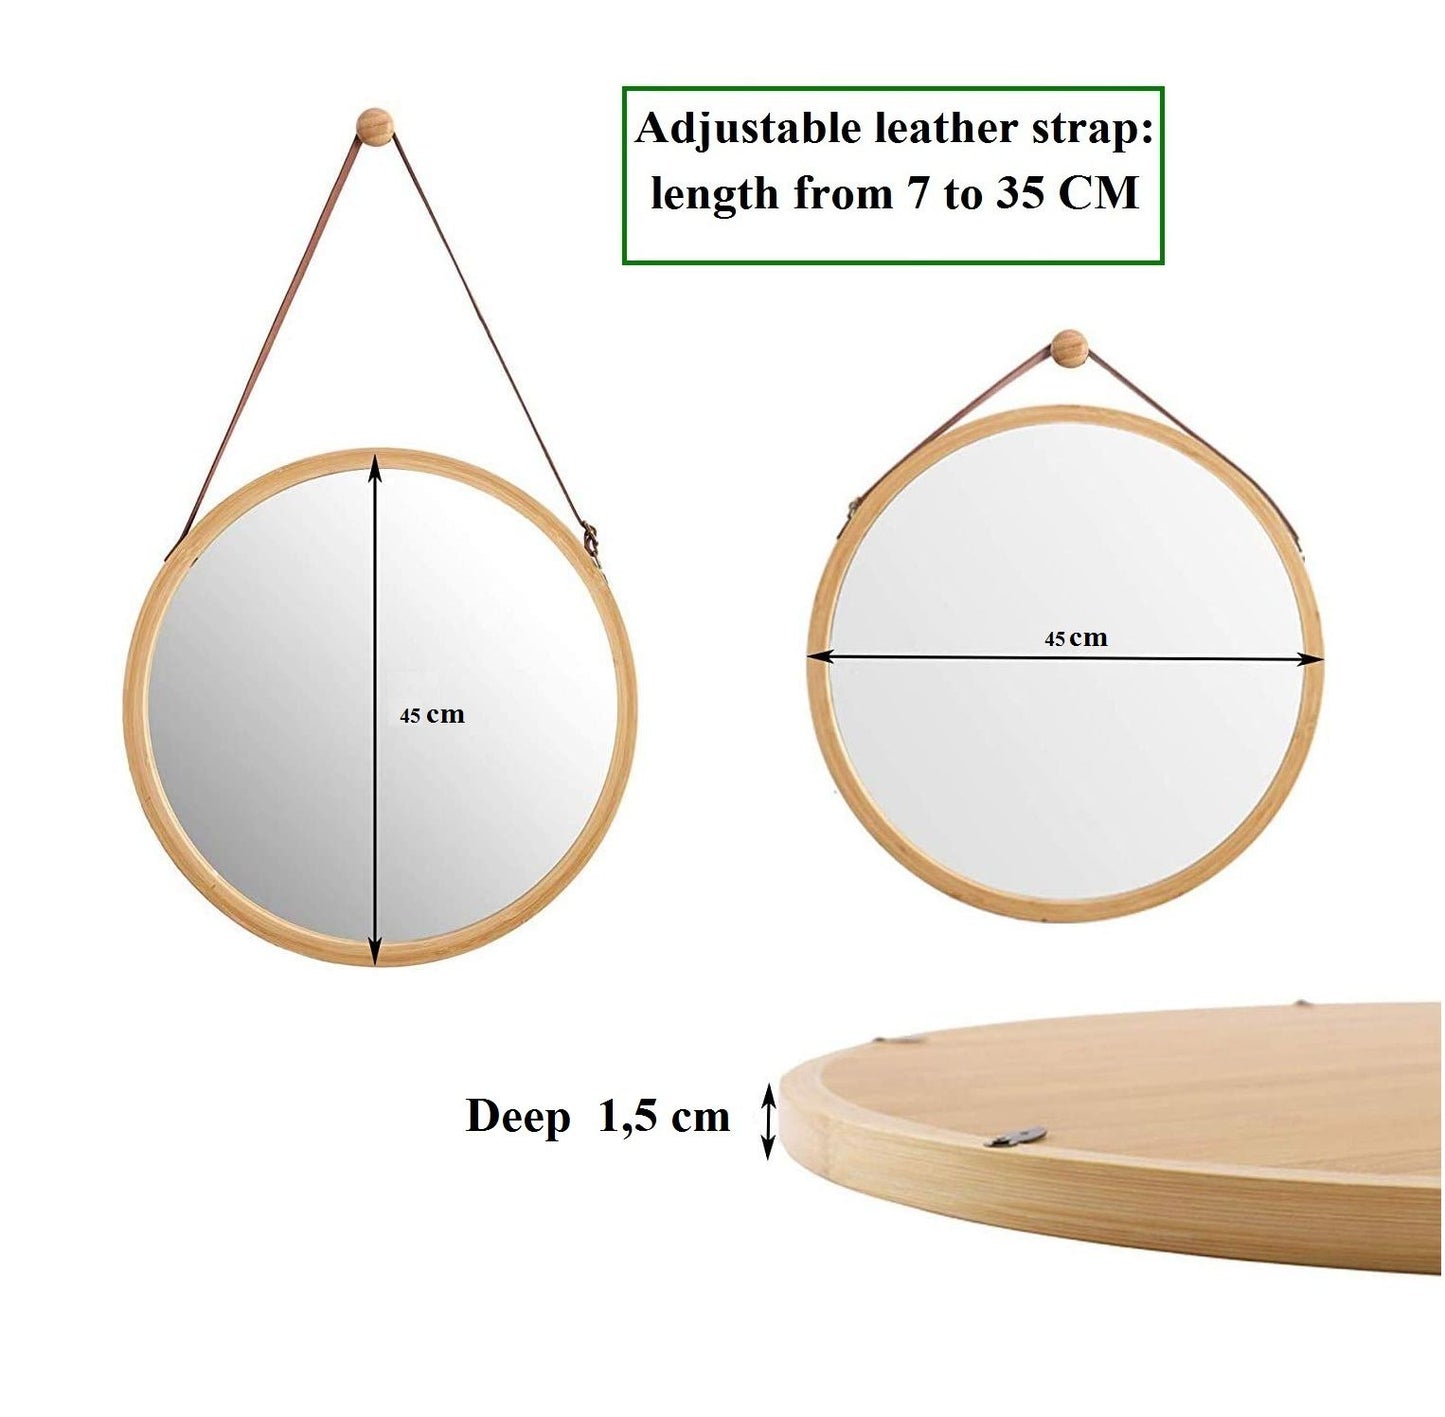 Hanging Round Wall Mirror 45 cm - Solid Bamboo Frame and Adjustable Leather Strap for Bathroom and Bedroom - BM House & Garden